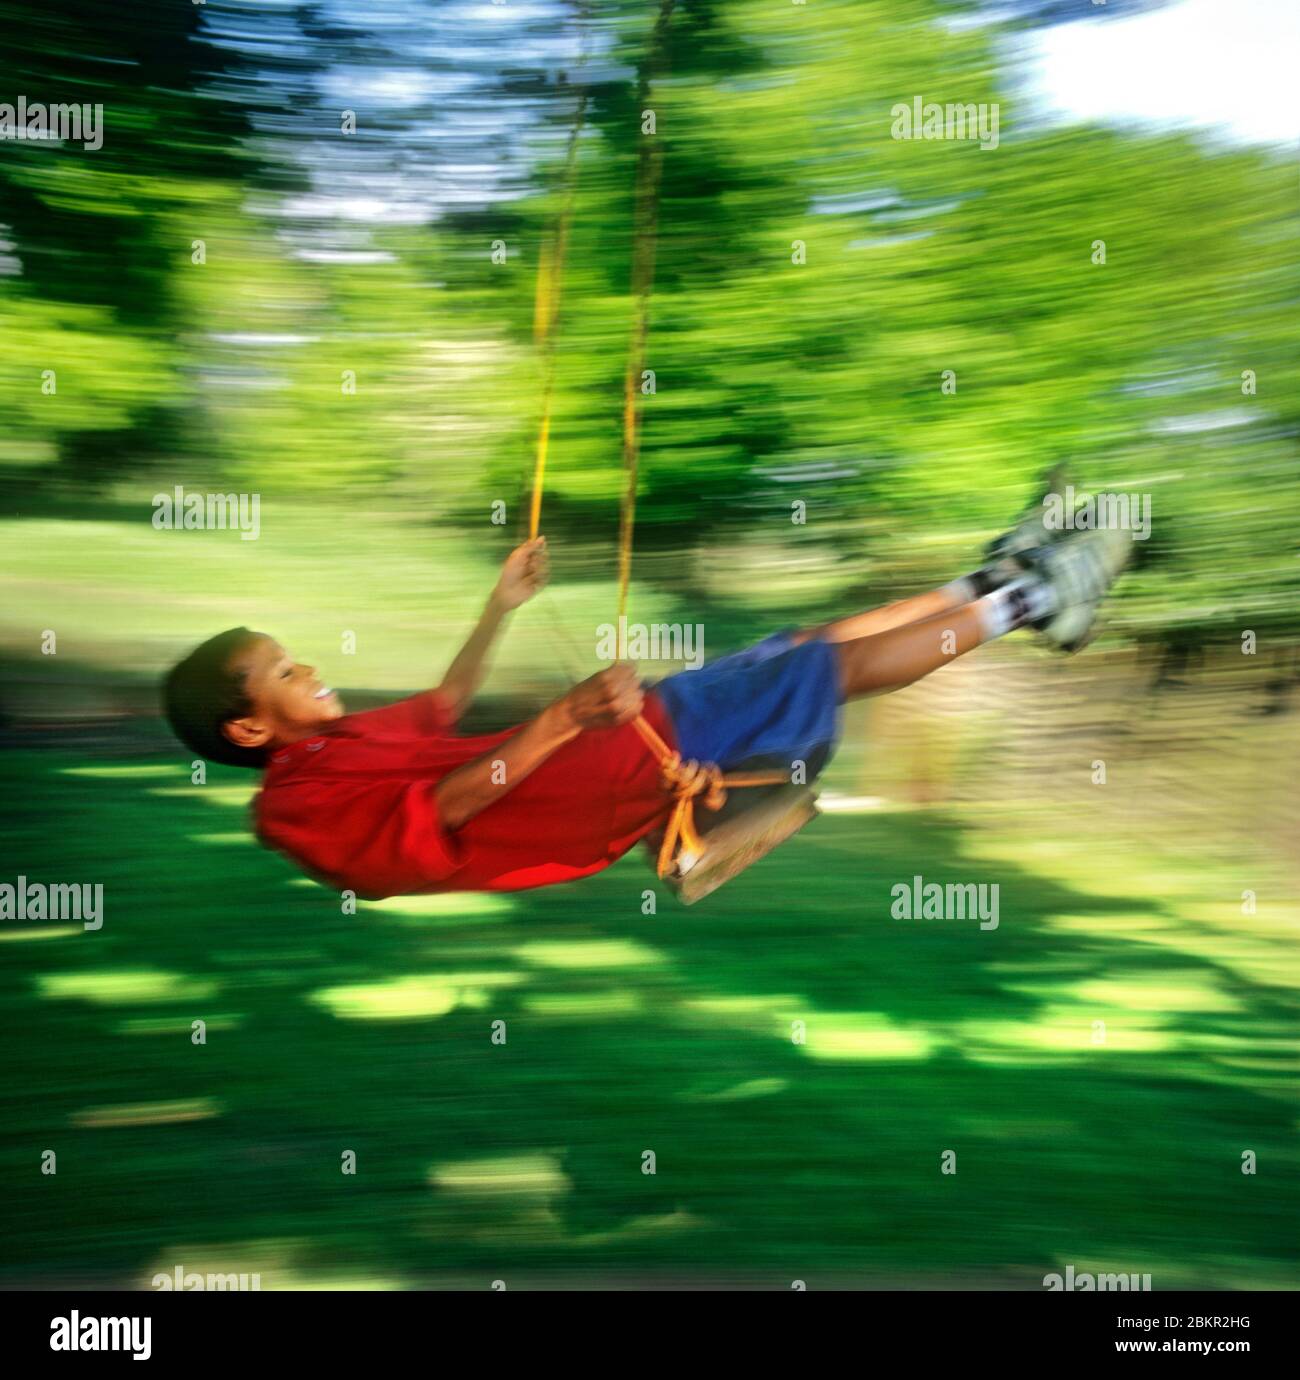 Teenage African American boy 13-15 years growth, energy, summer garden speed blur happily swinging on a rustic rope garden swing, with lush green grass and foliage Stock Photo